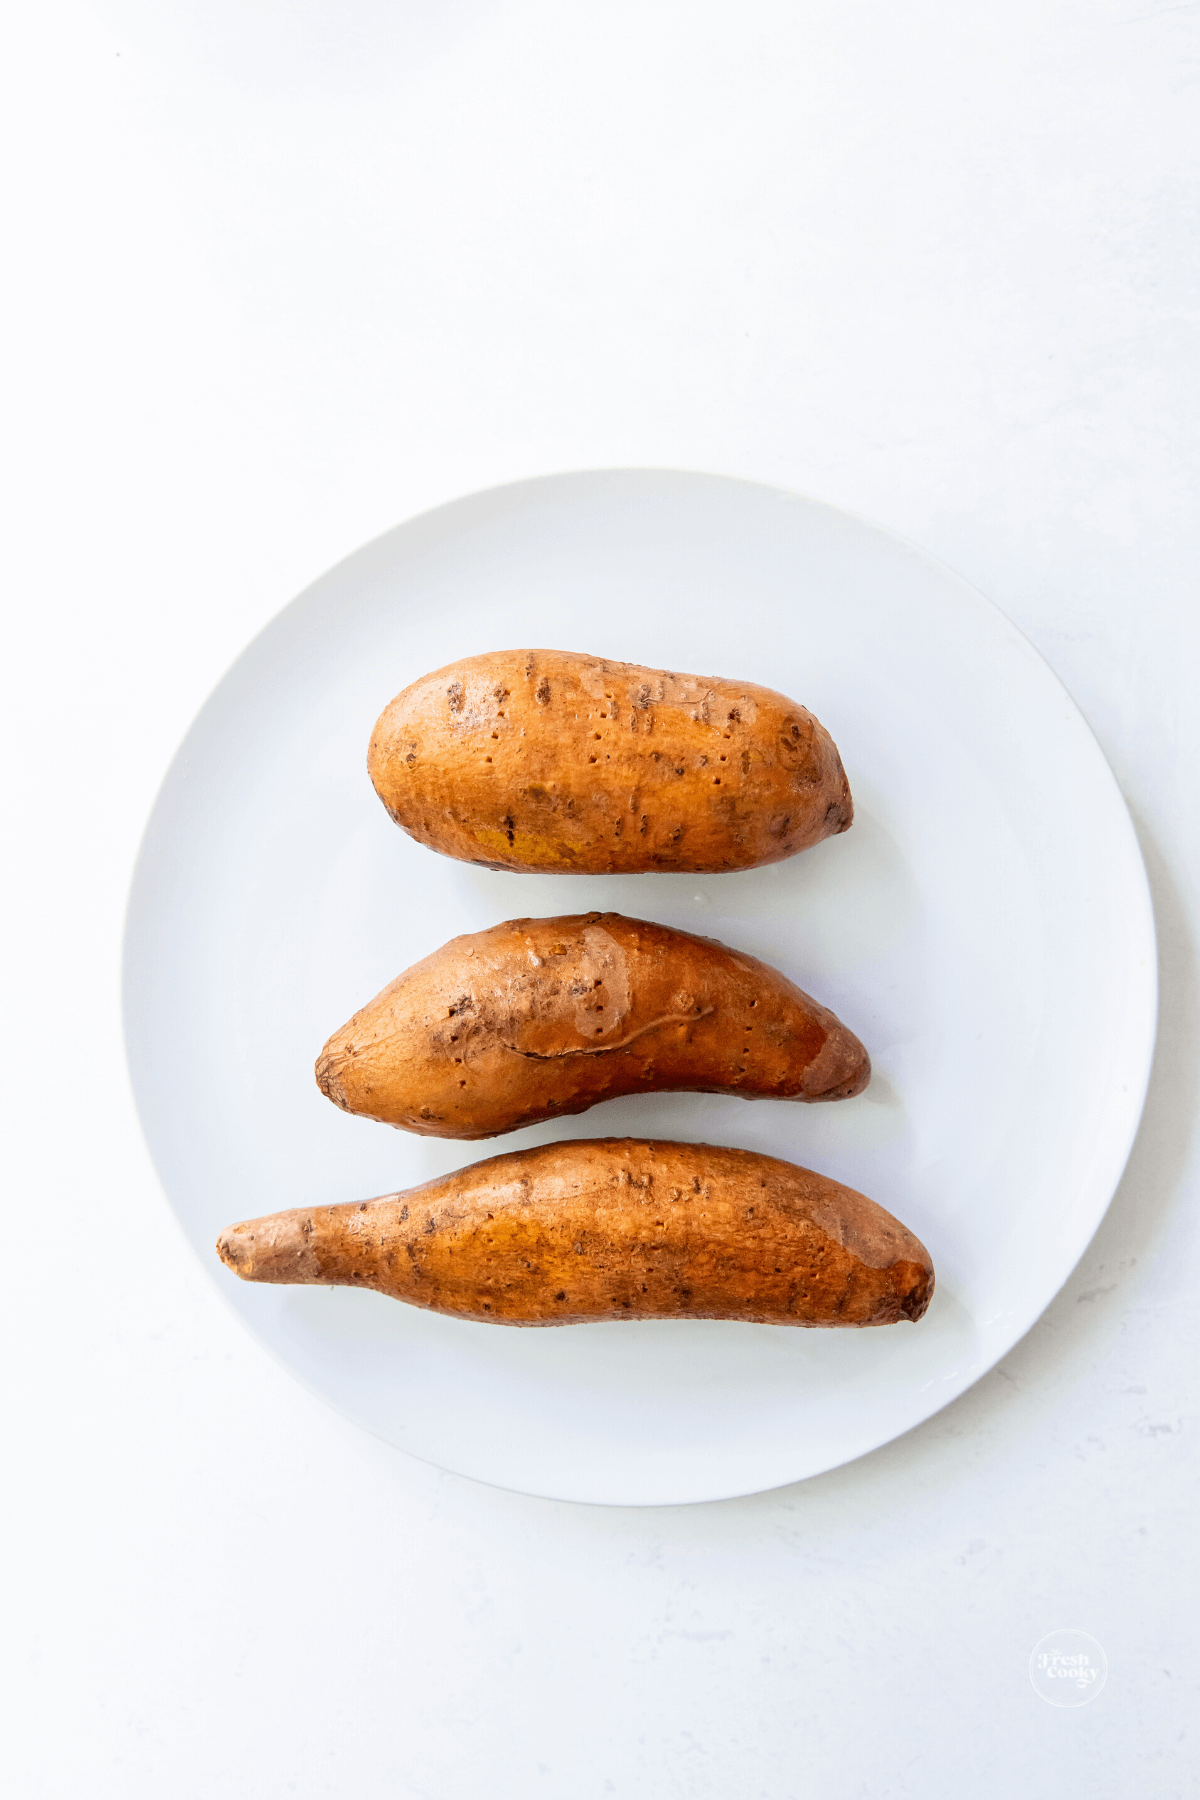 Washed and lightly oiled sweet potatoes on plate. 